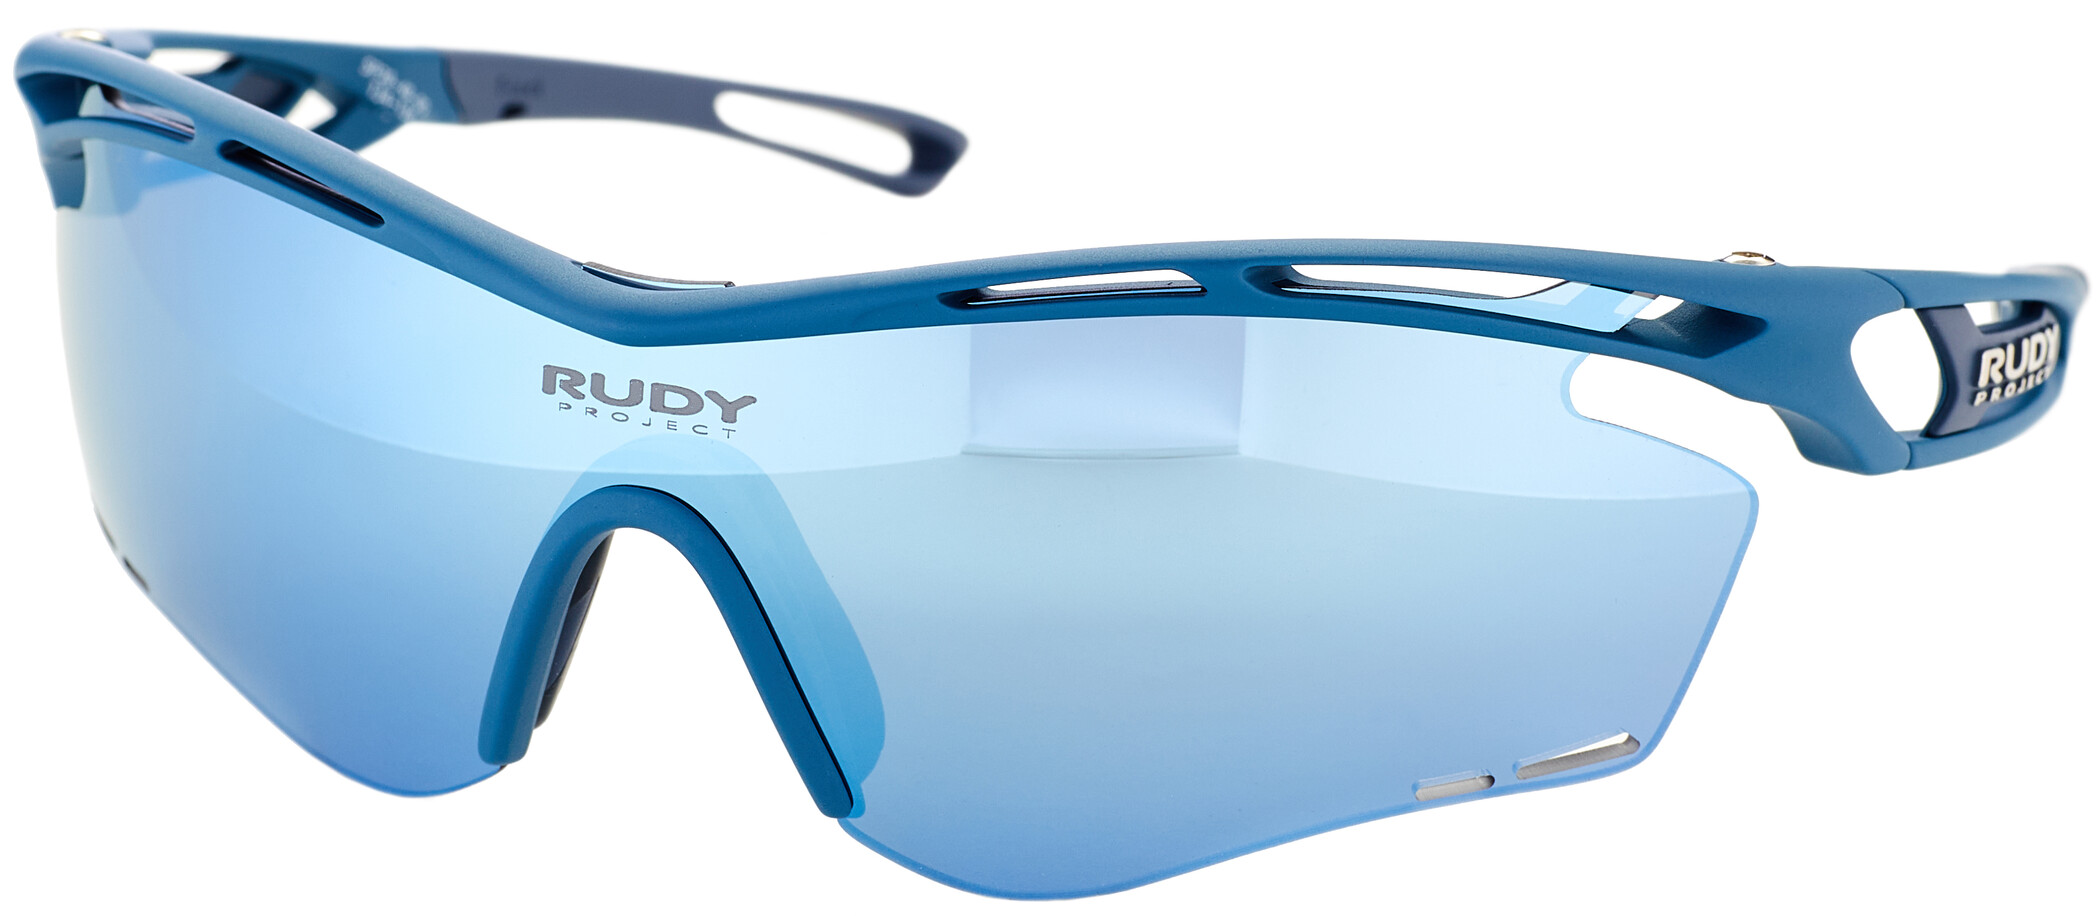 Rudy Project Tralyx Glasses pacific blue matte/multilaser ice ...